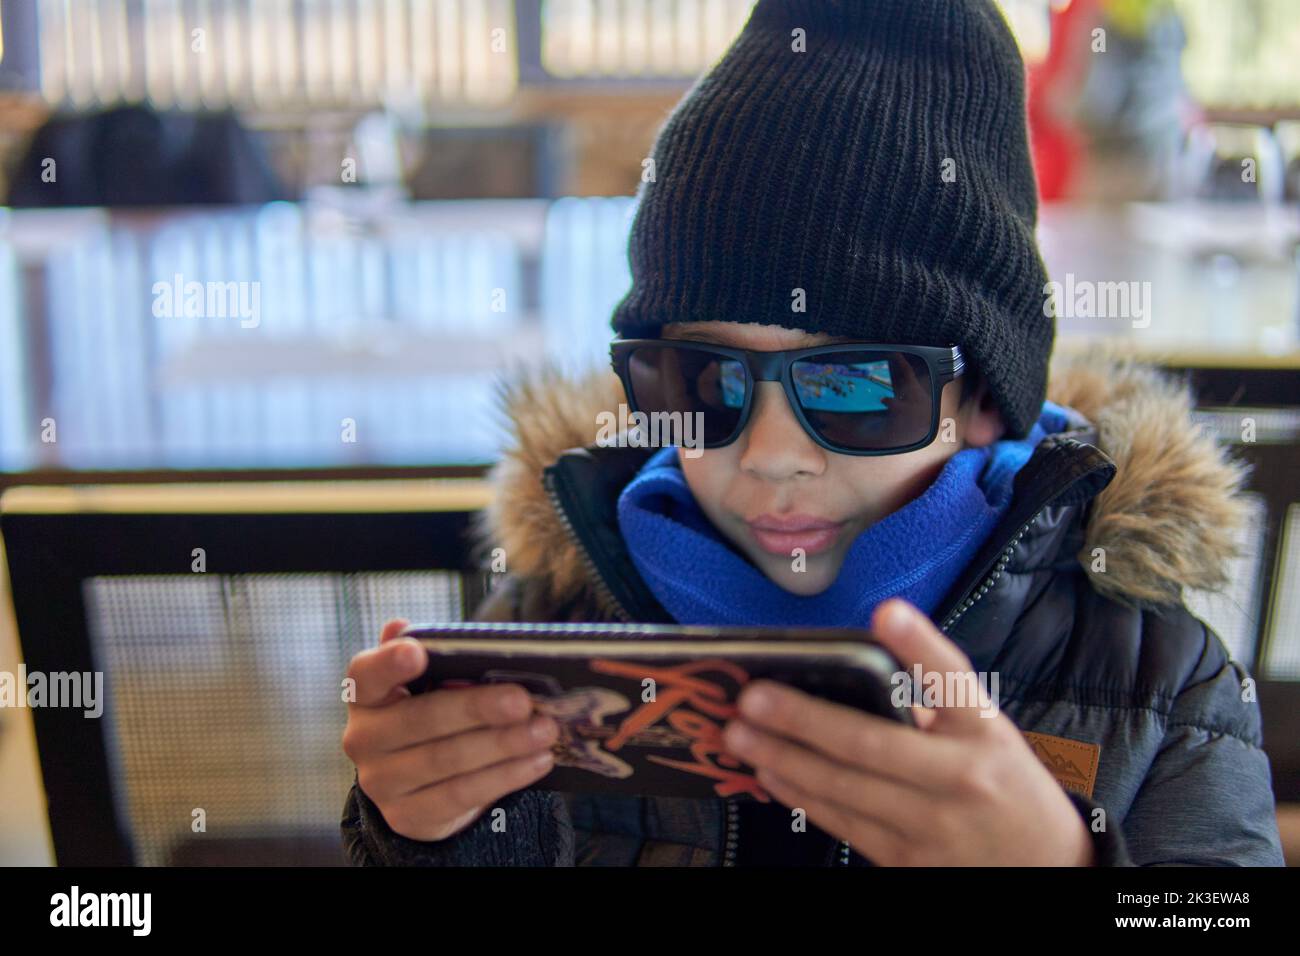 latino kid with sunglasses and a wool cap using the cell phone very cool. Wintertime. Focus on foreground Stock Photo